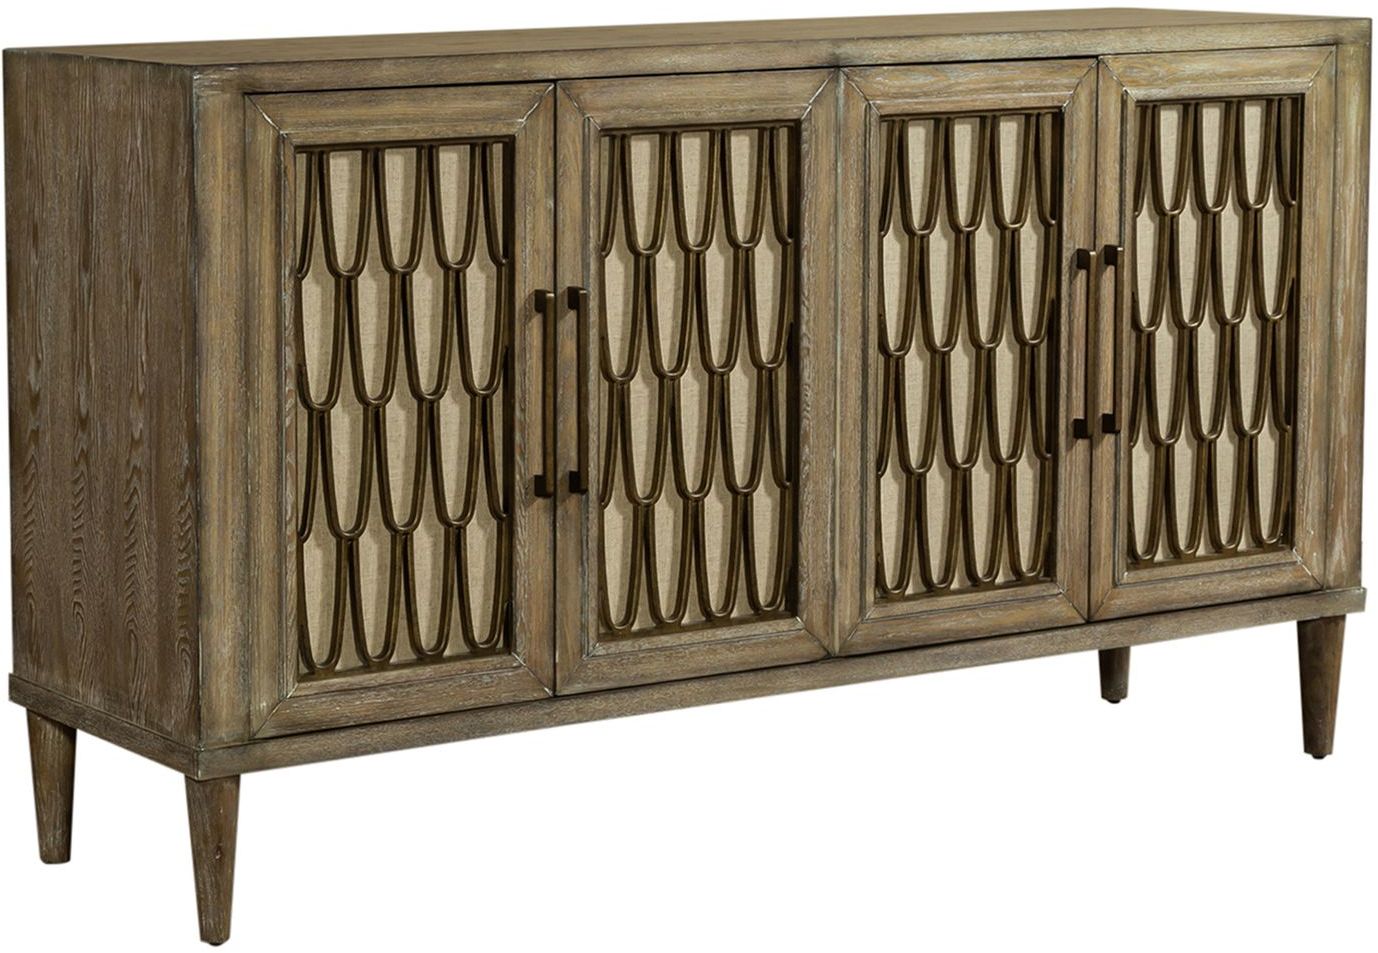 Liberty Furniture Devonshire Driftwood Finish 4 Door Accent Cabinet